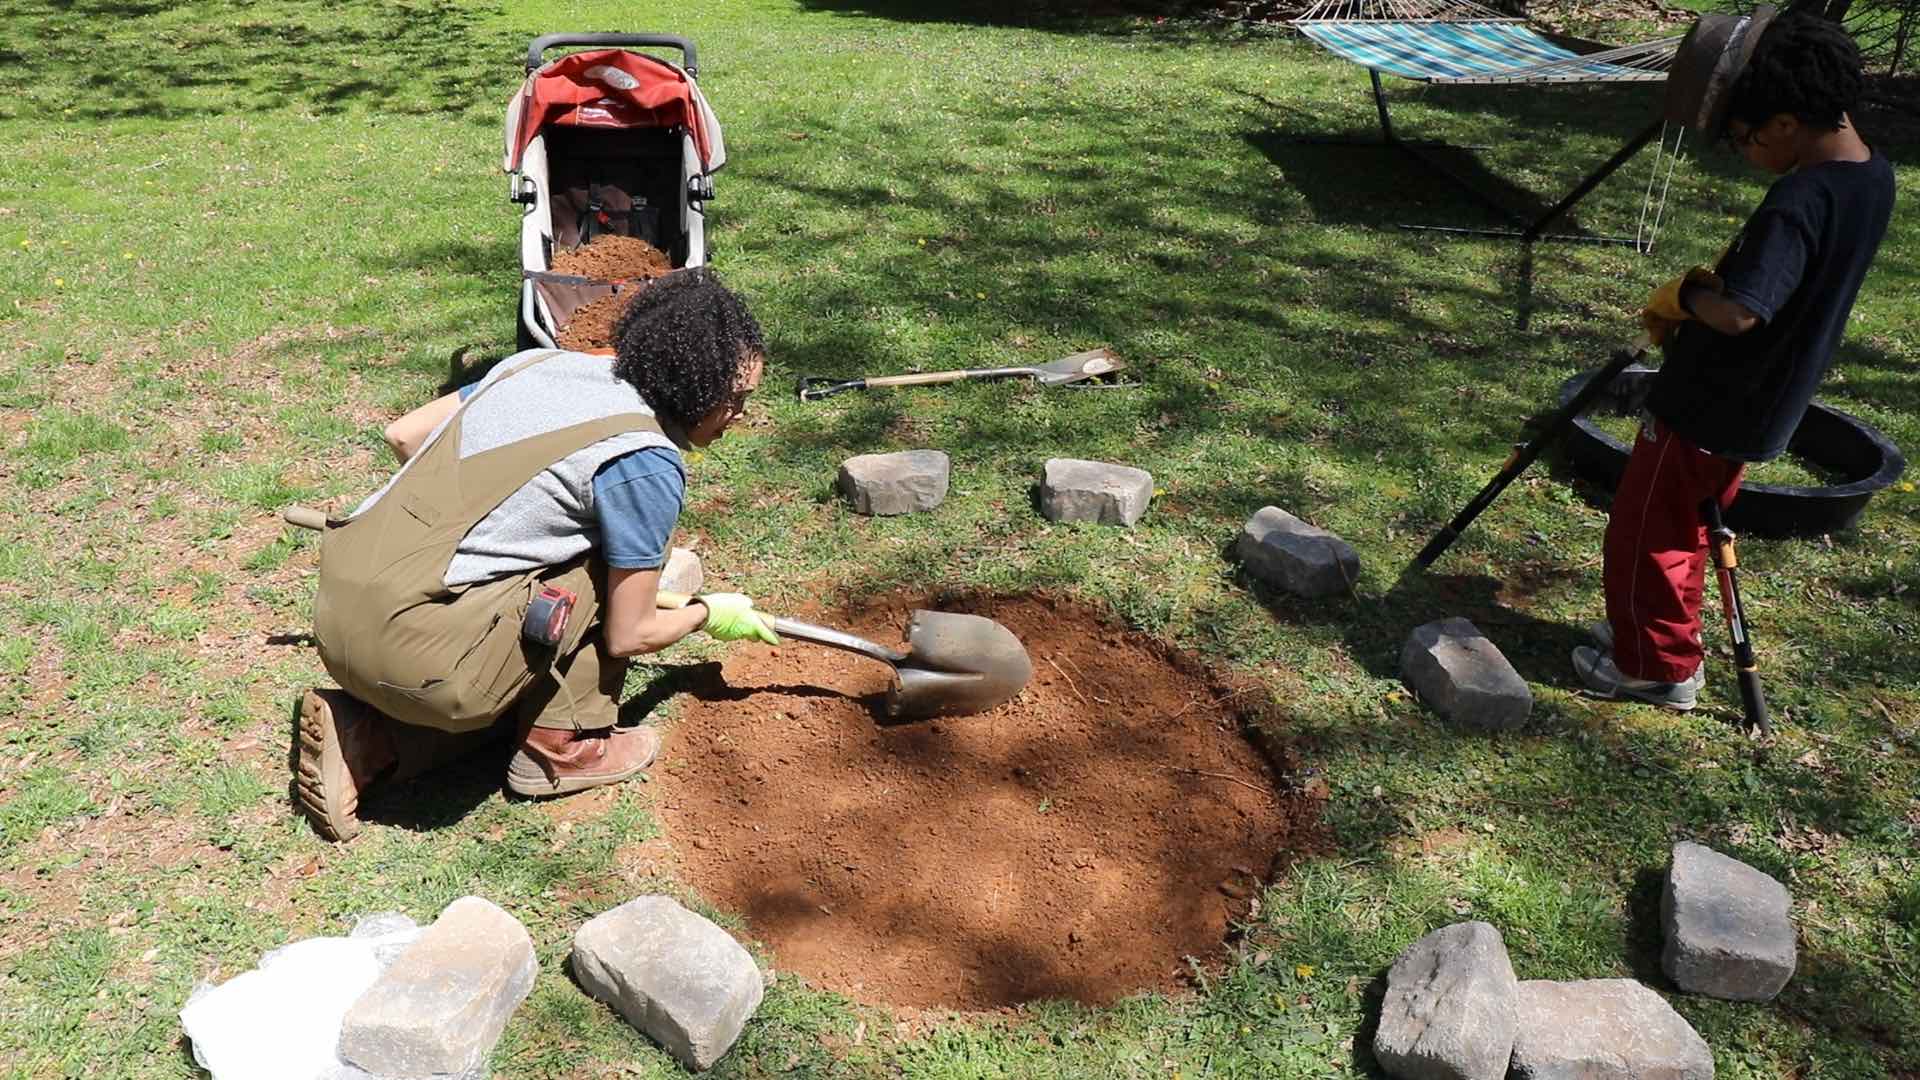 Diy Fire Pit With Gravel Stones, Can I Dig A Fire Pit In My Backyard